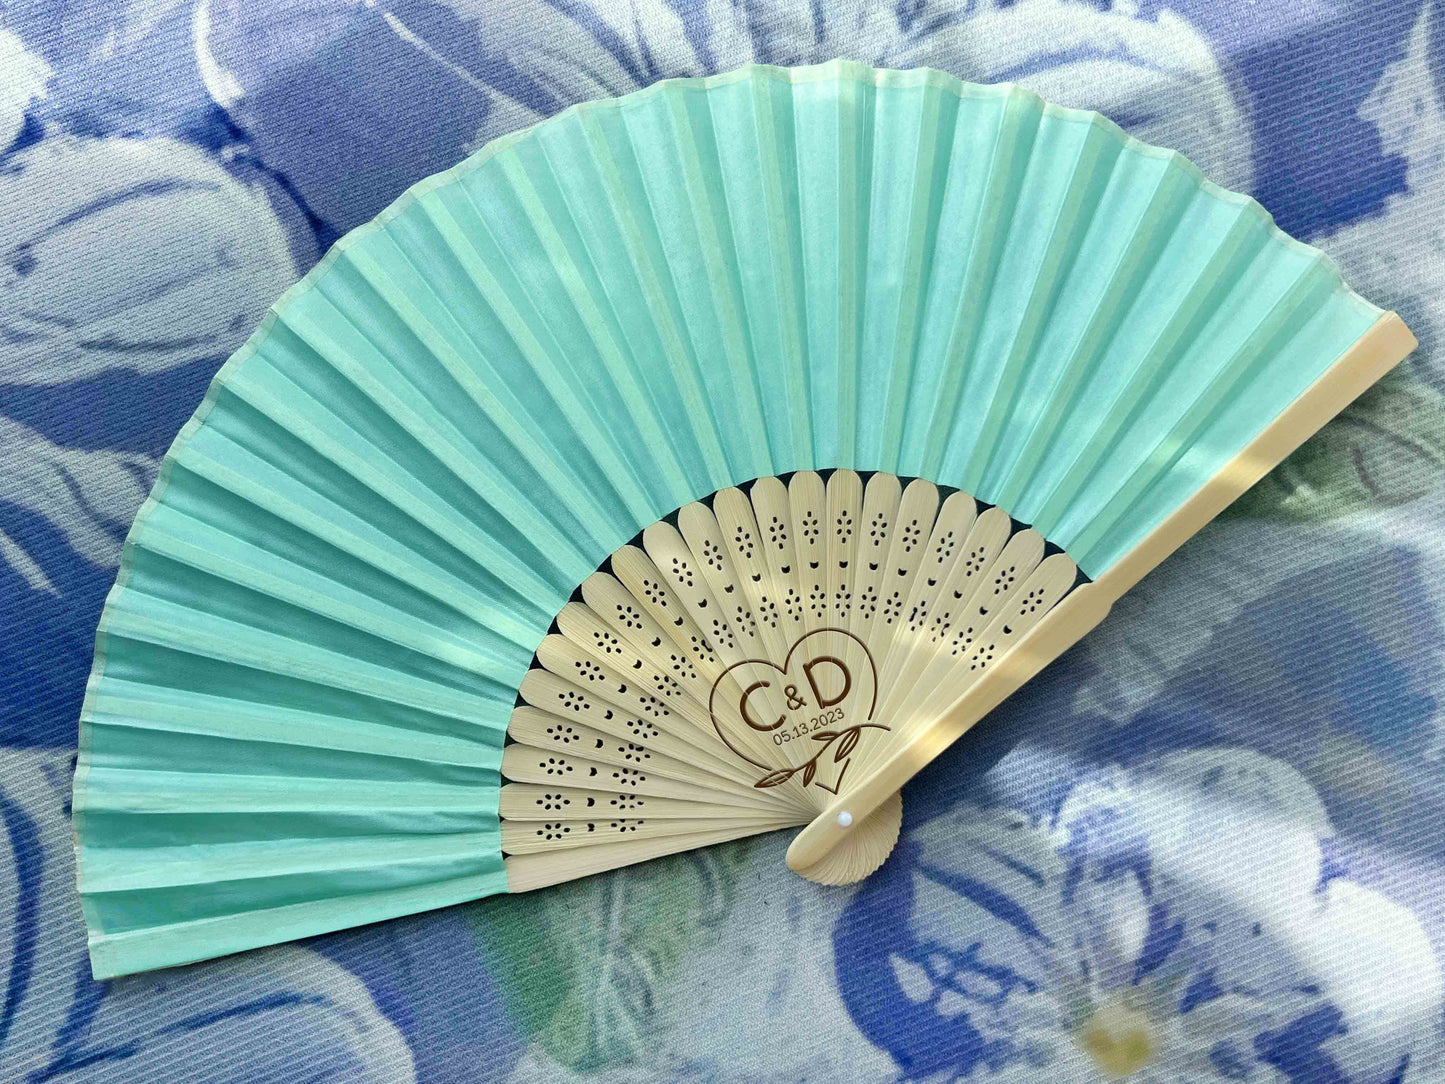 Personalized Custom Fabric Fans Wedding Party Favors Gifts for Guests in Bulk Monogram Engraved Folding Hand Fans